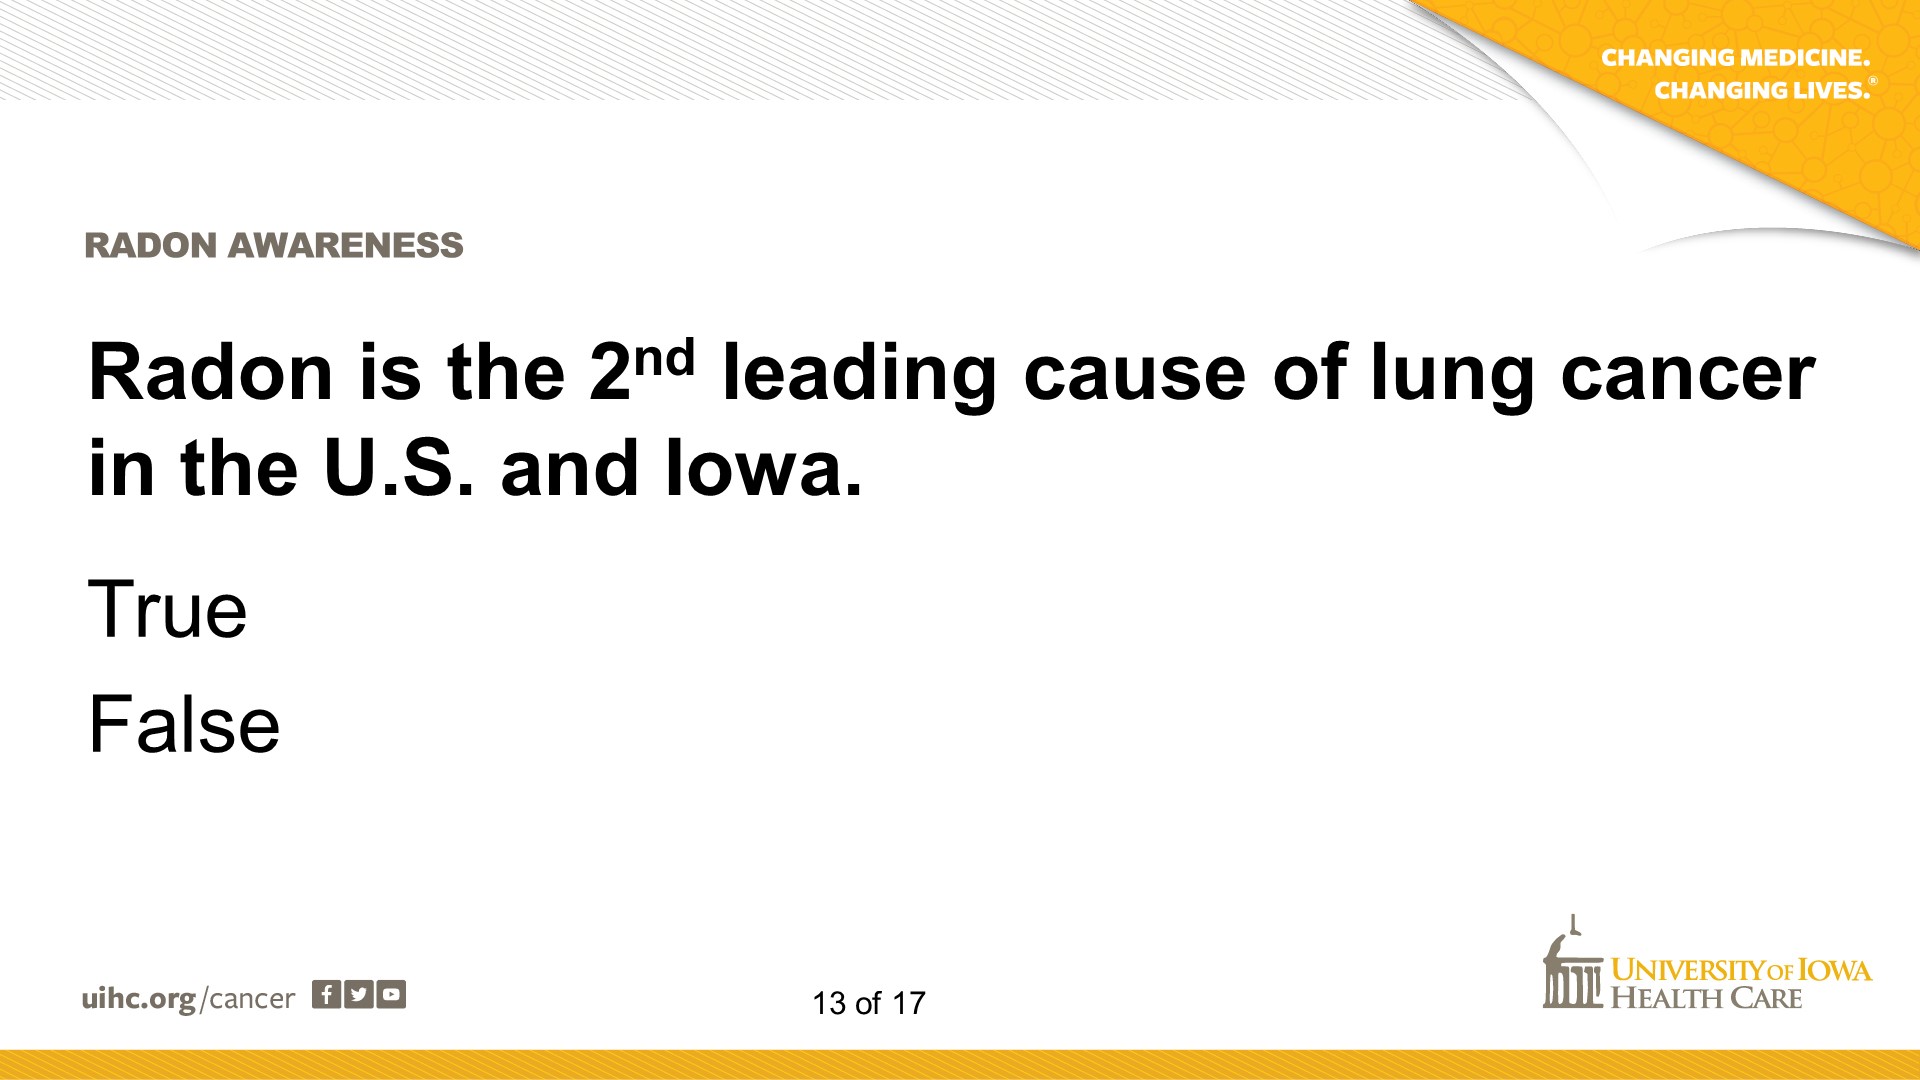 True or false? Radon is the 2nd leading cause of lung cancer in the U.S. and Iowa.